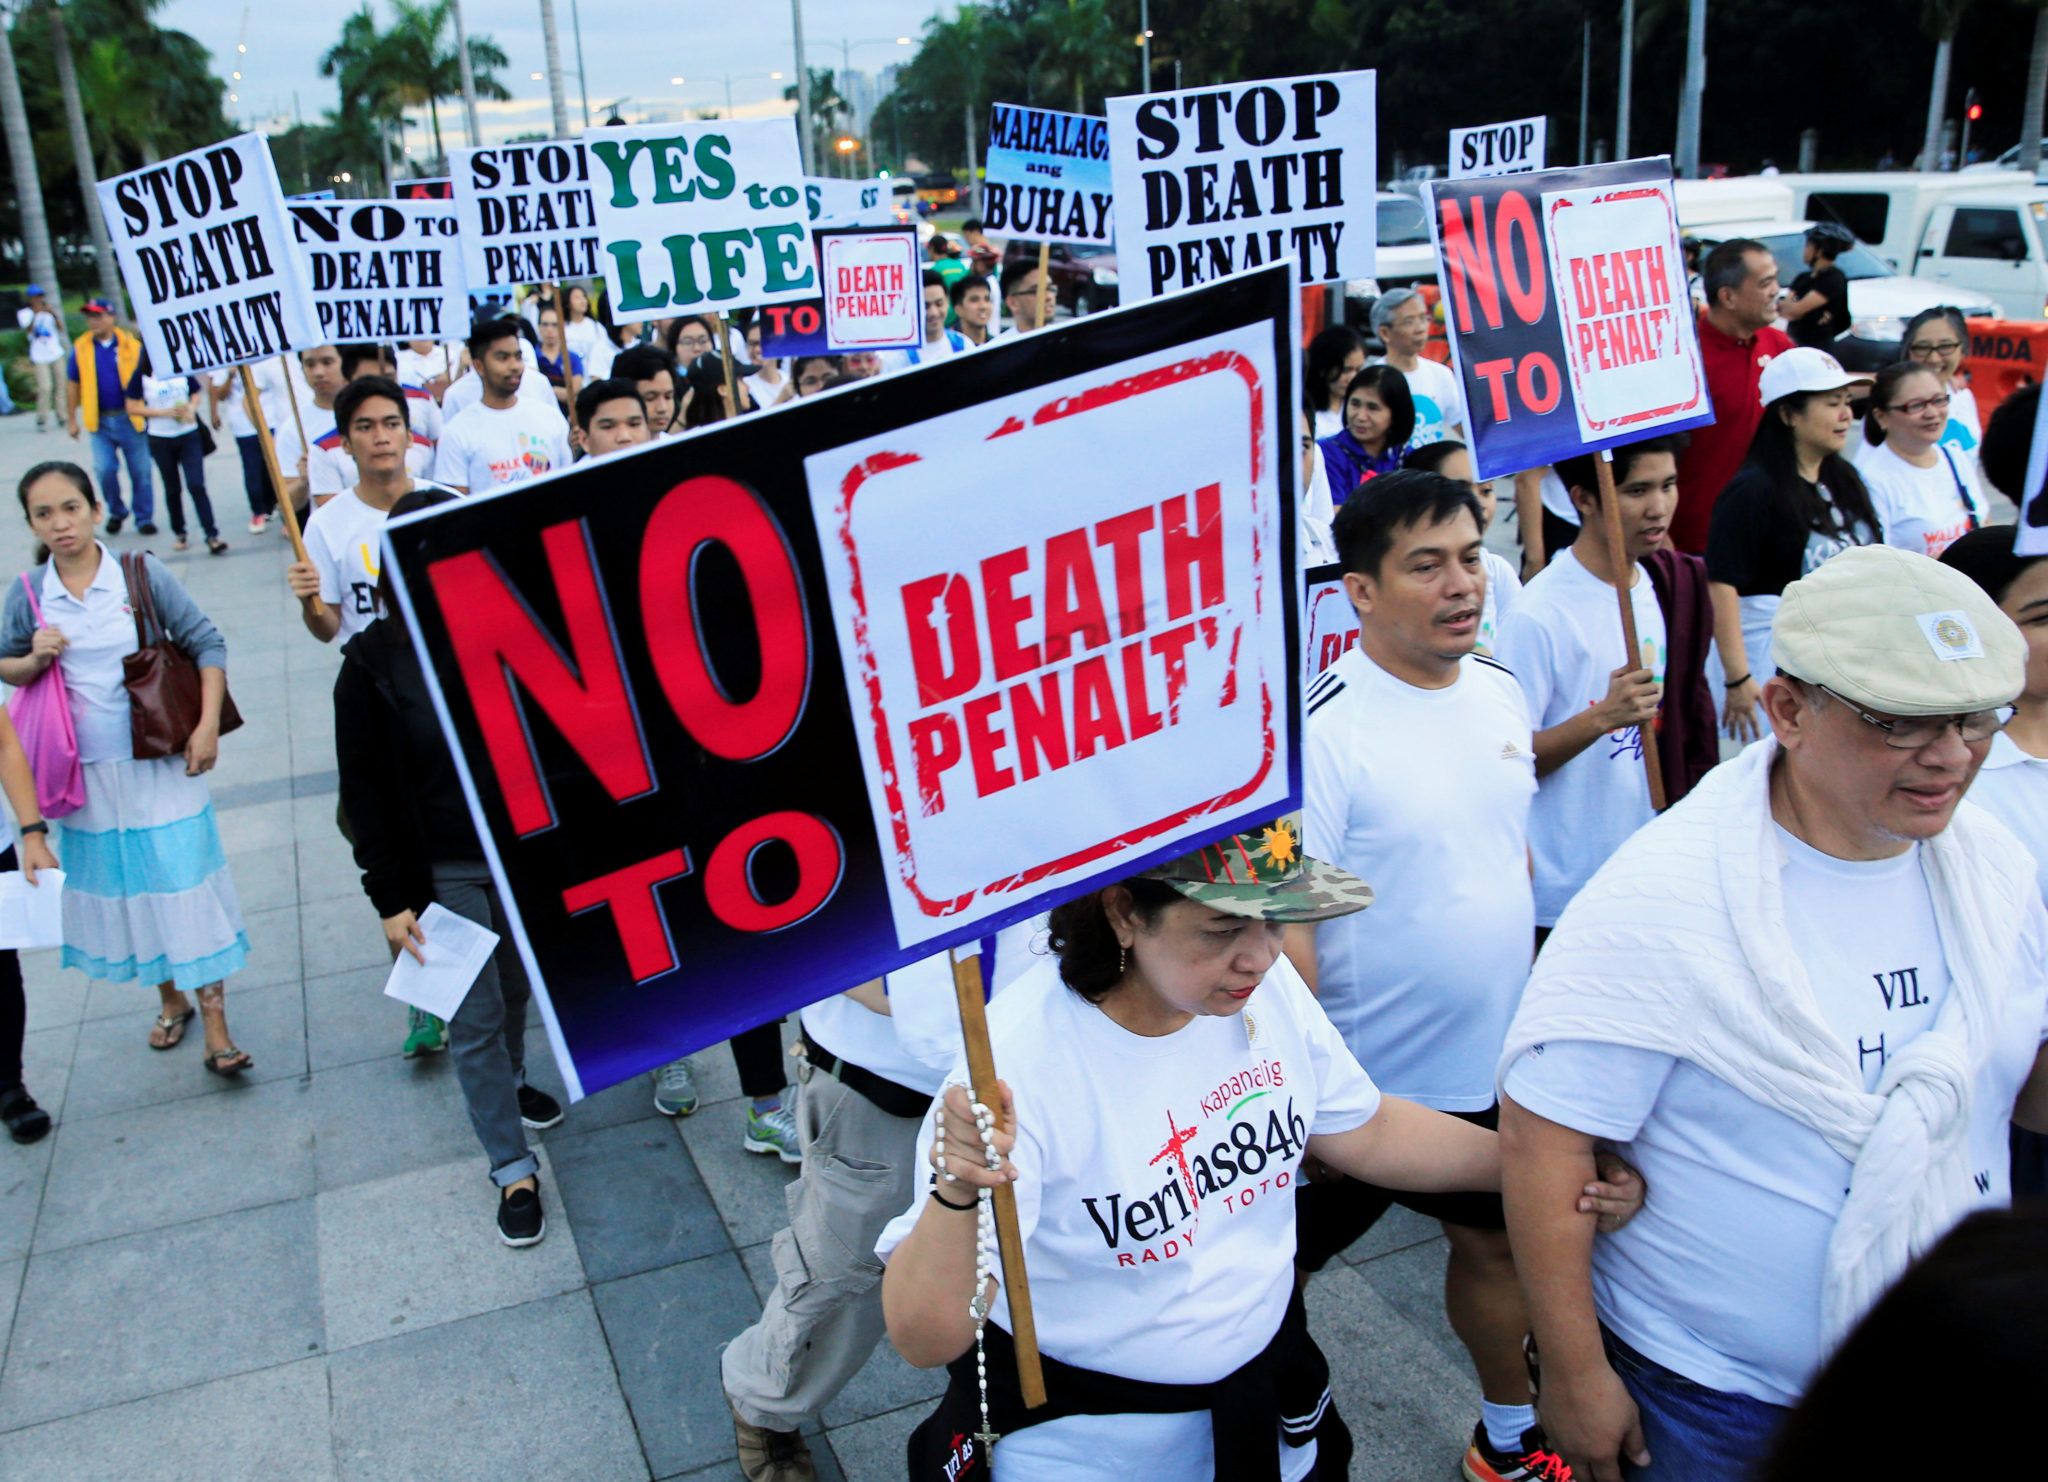 Governments must put an end to death penalty cruelty and take steps towards full abolition